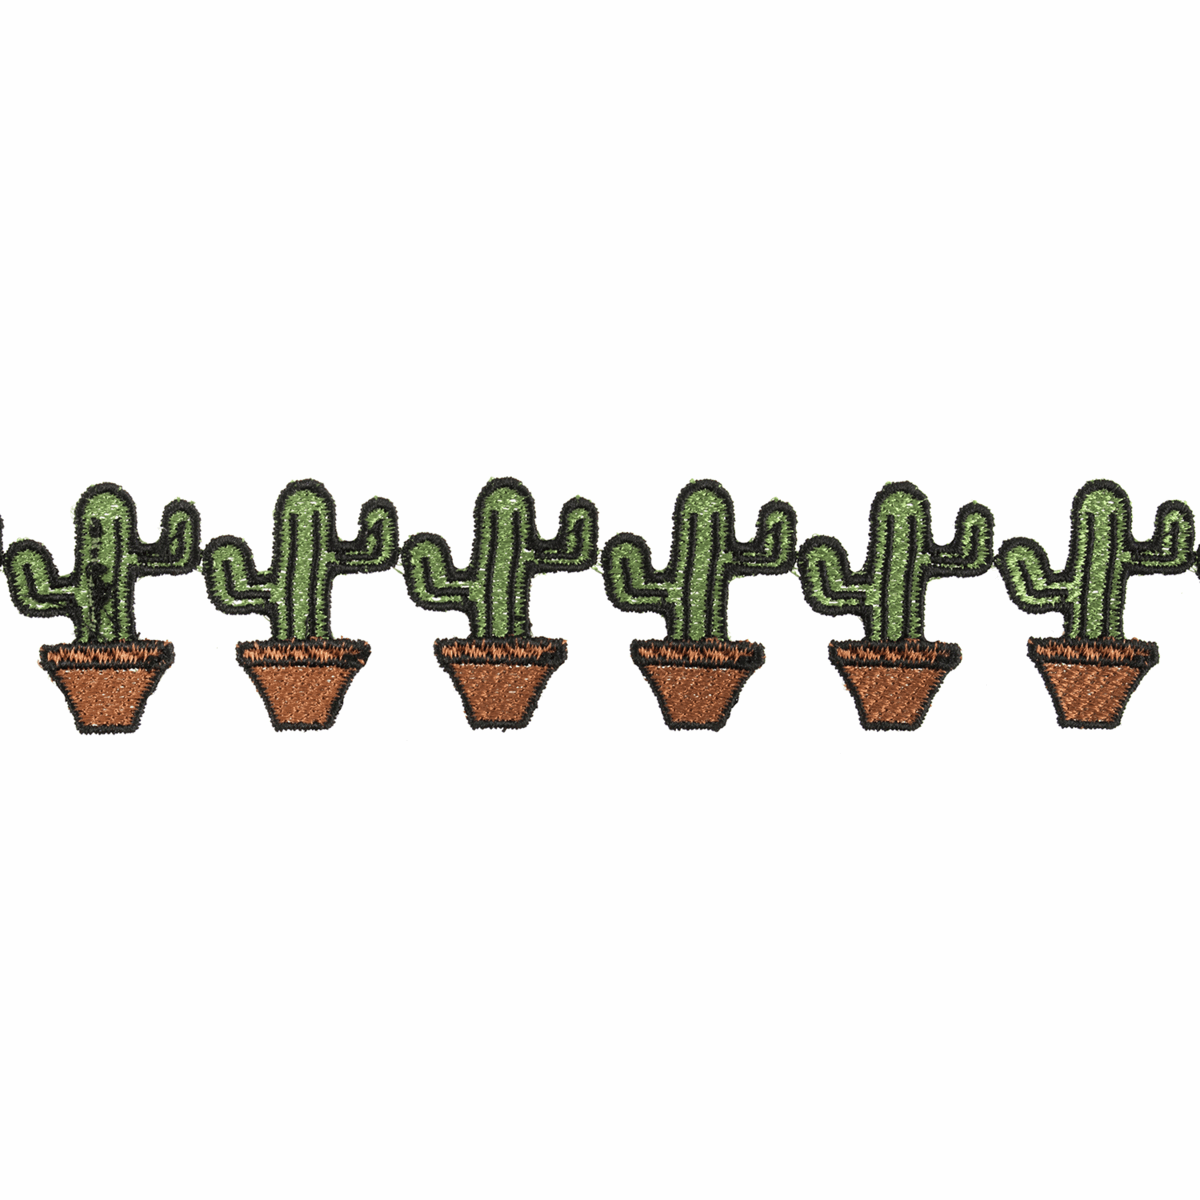 Cactus strip trim embellishment. 39 mm tall by the metre.